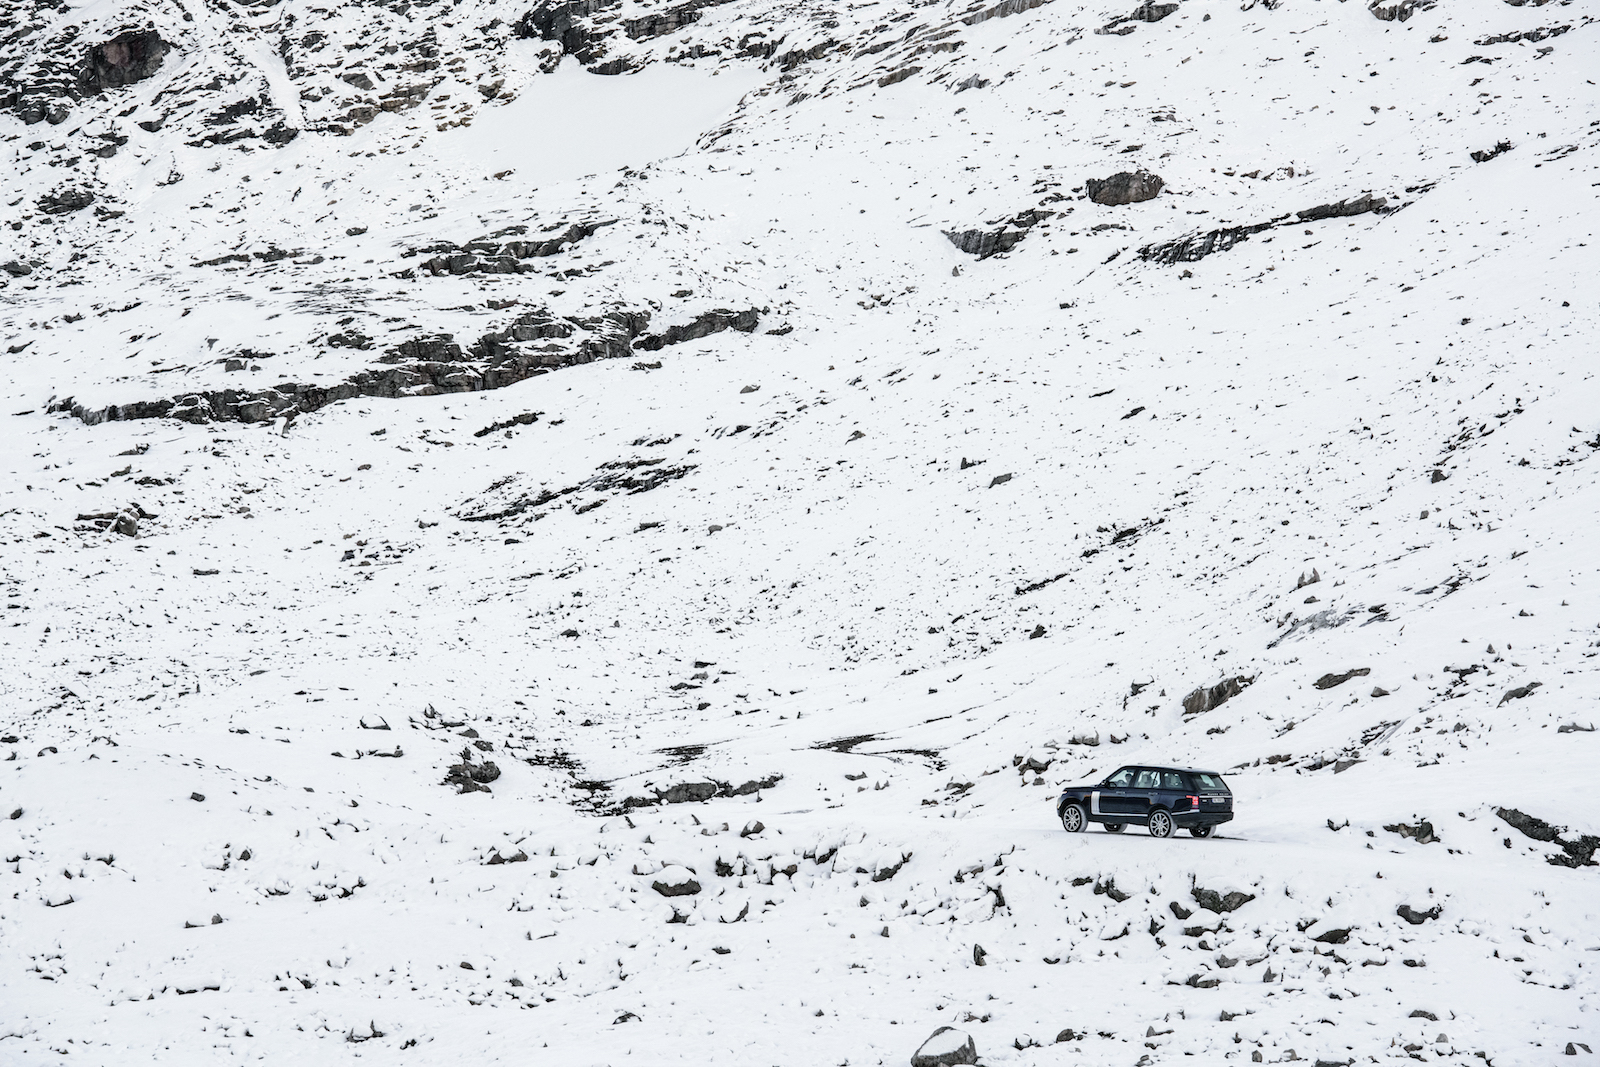 NORWAY. 2016.  Mountain driving on the plateau above Geiranger. Photographed on assignment for Land Rover.